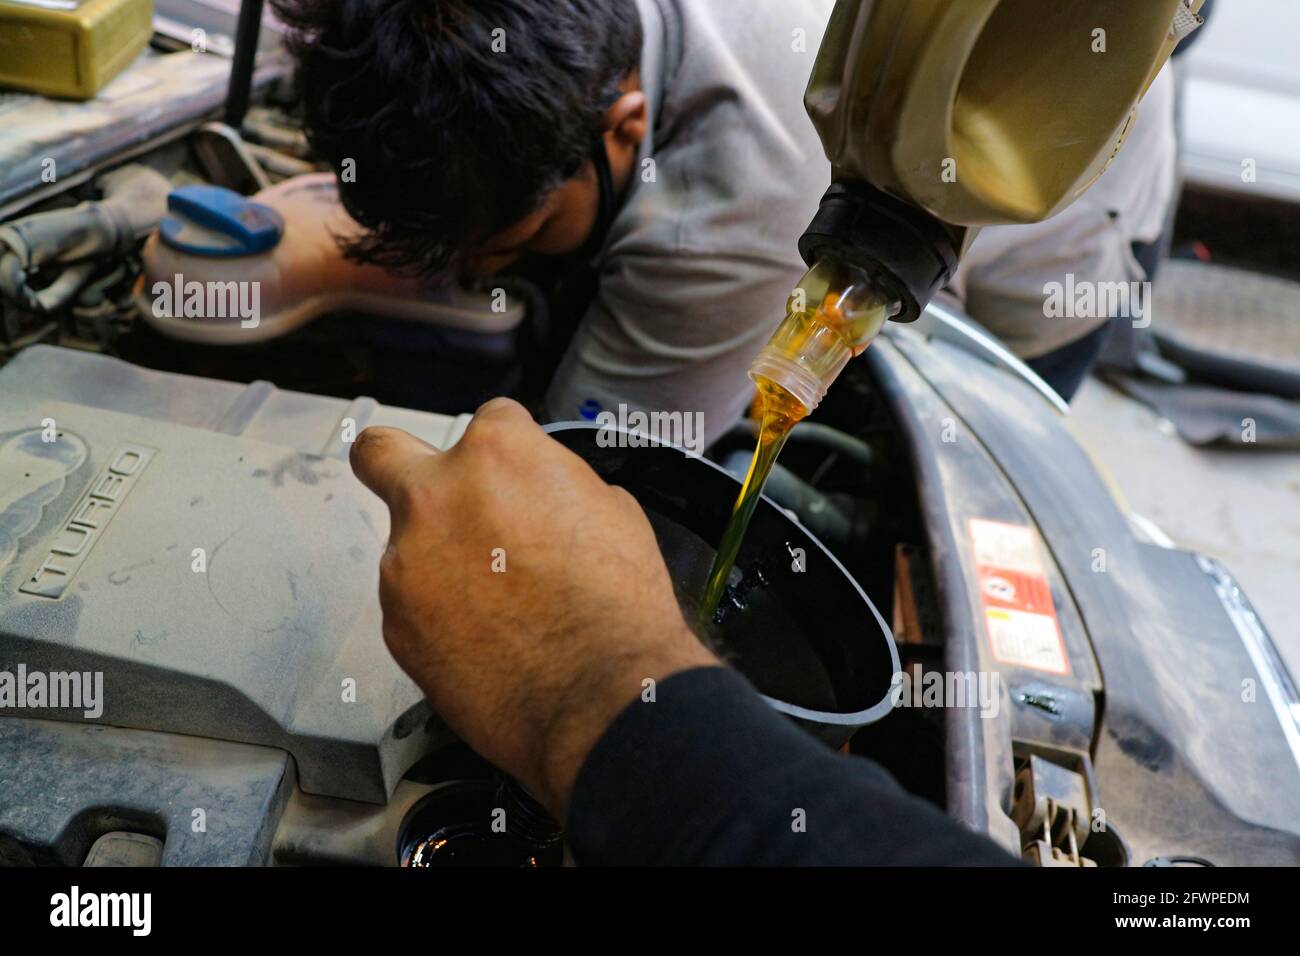 Kuwait City – Kuwait – April 15, 2021: Mechanic working on car while another pours engine oil Stock Photo